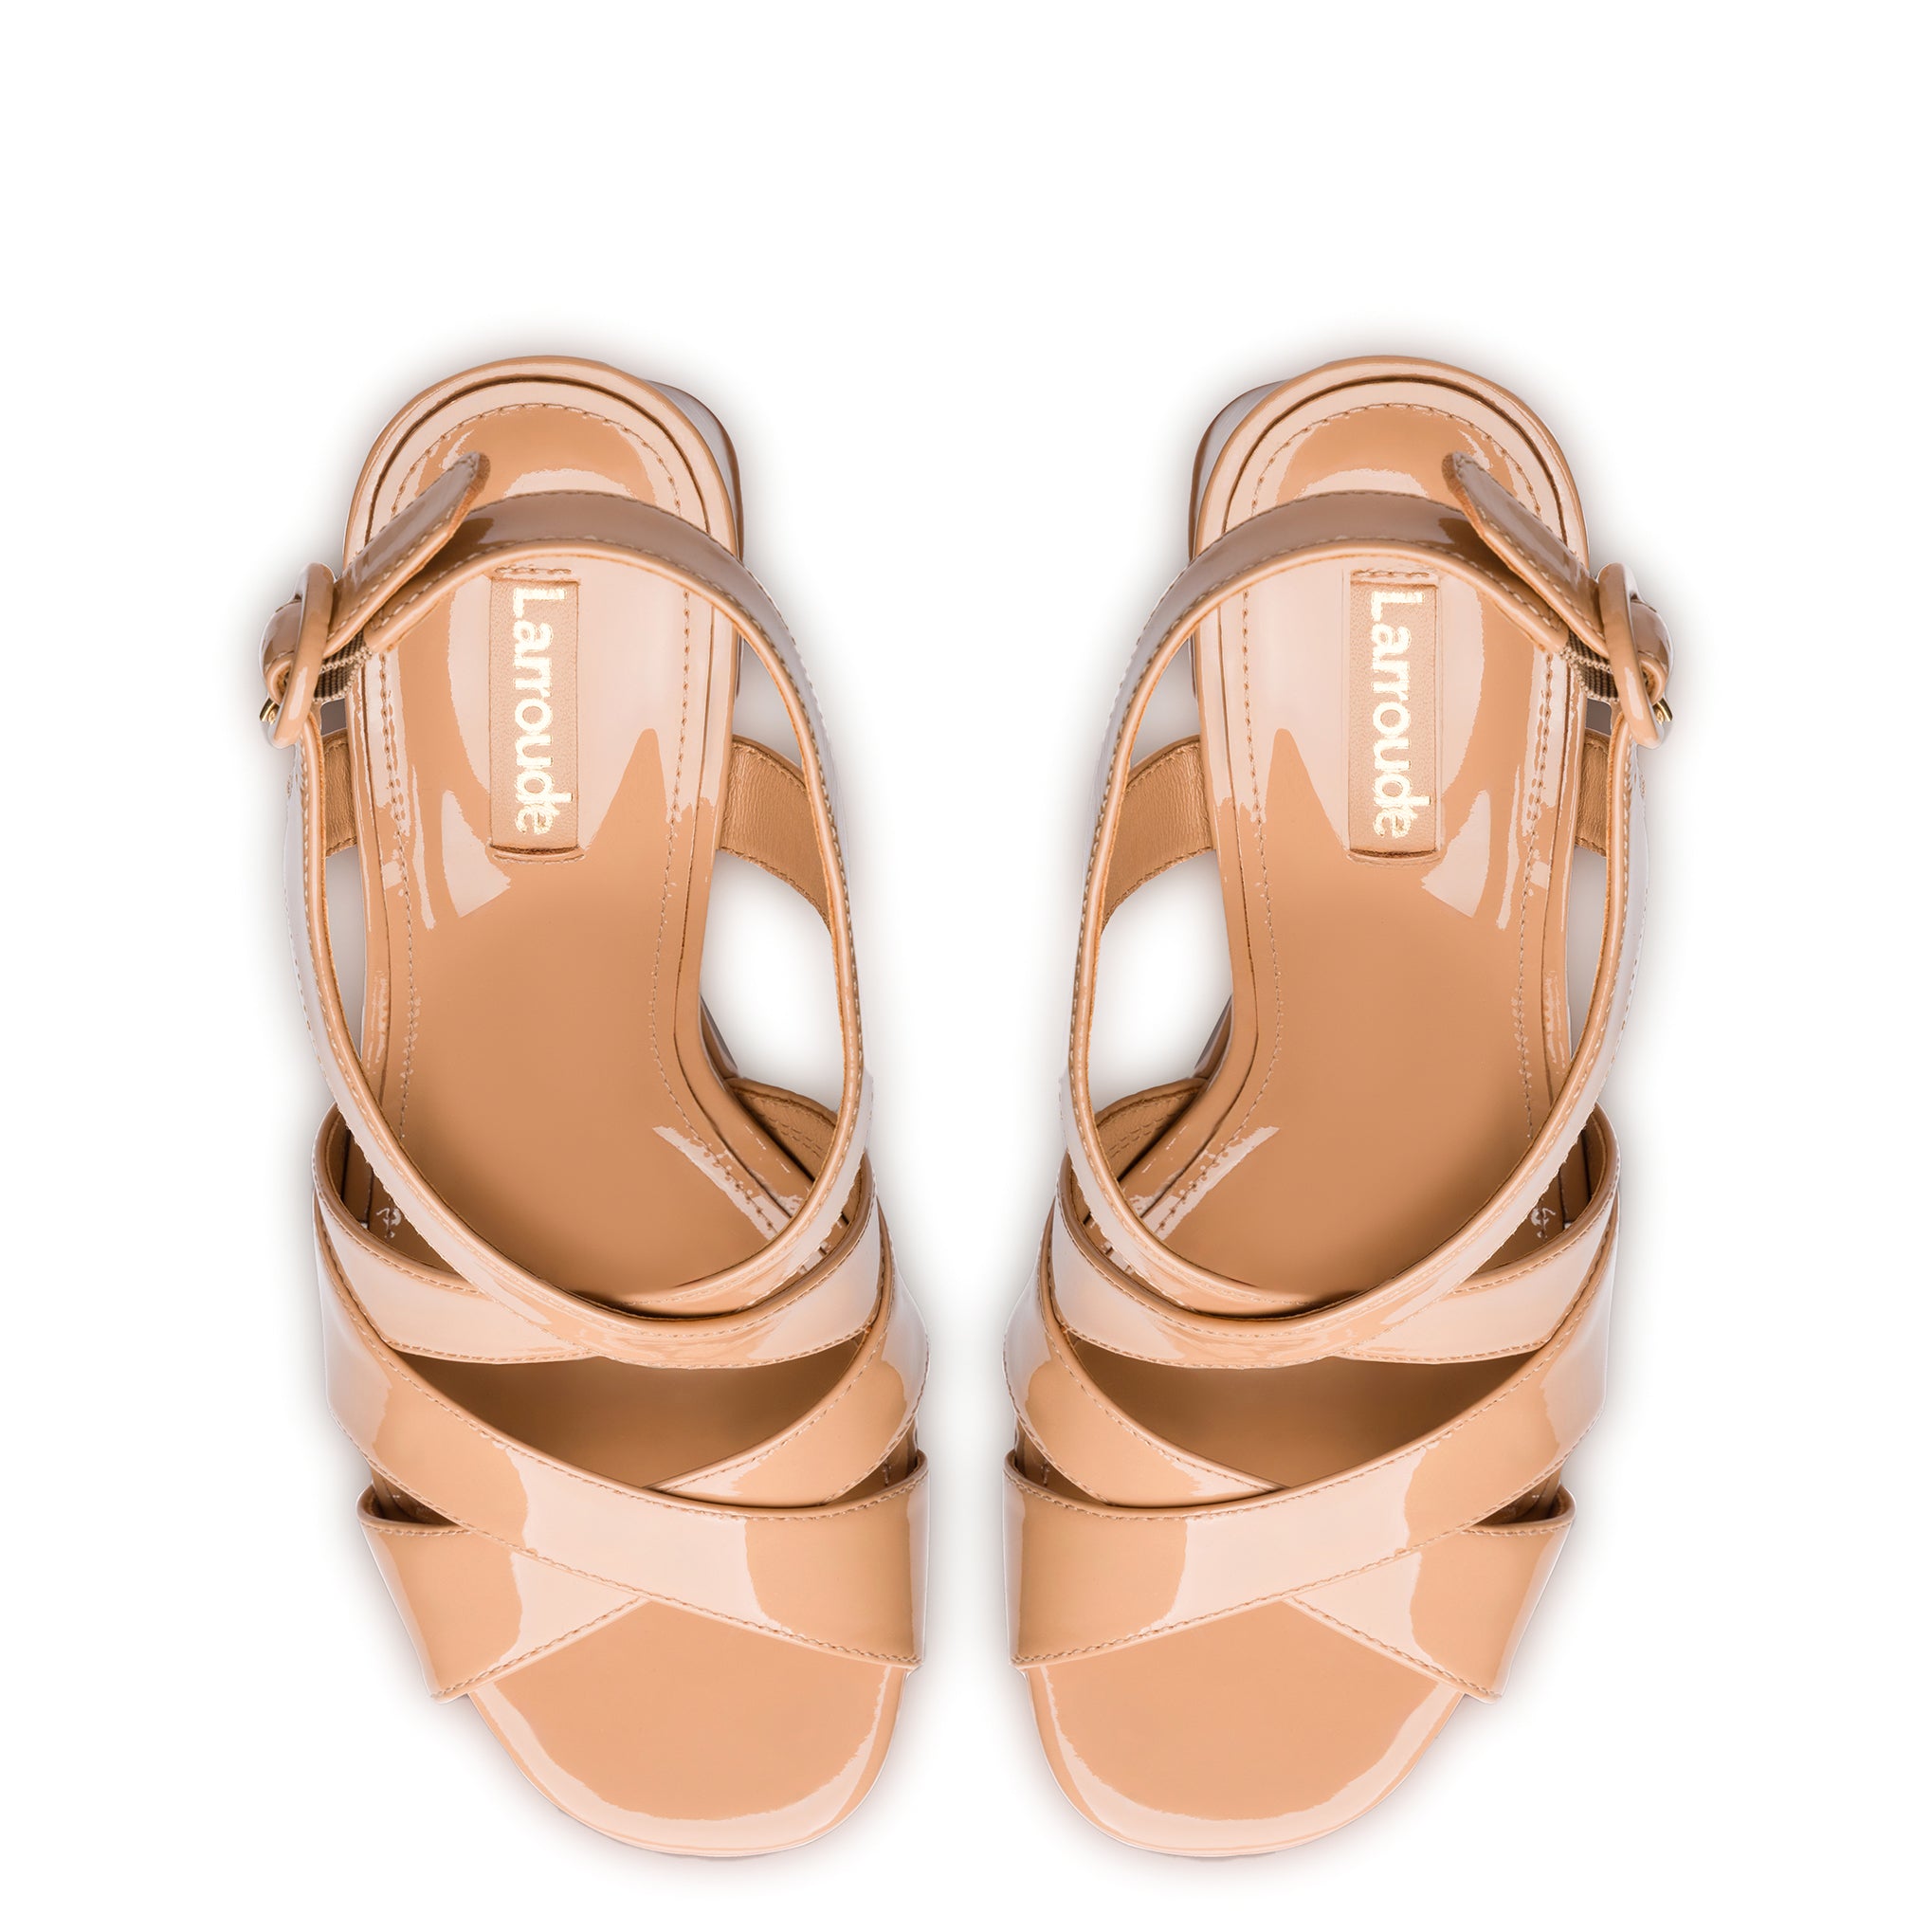 Bee Sandal In Tan Patent Leather